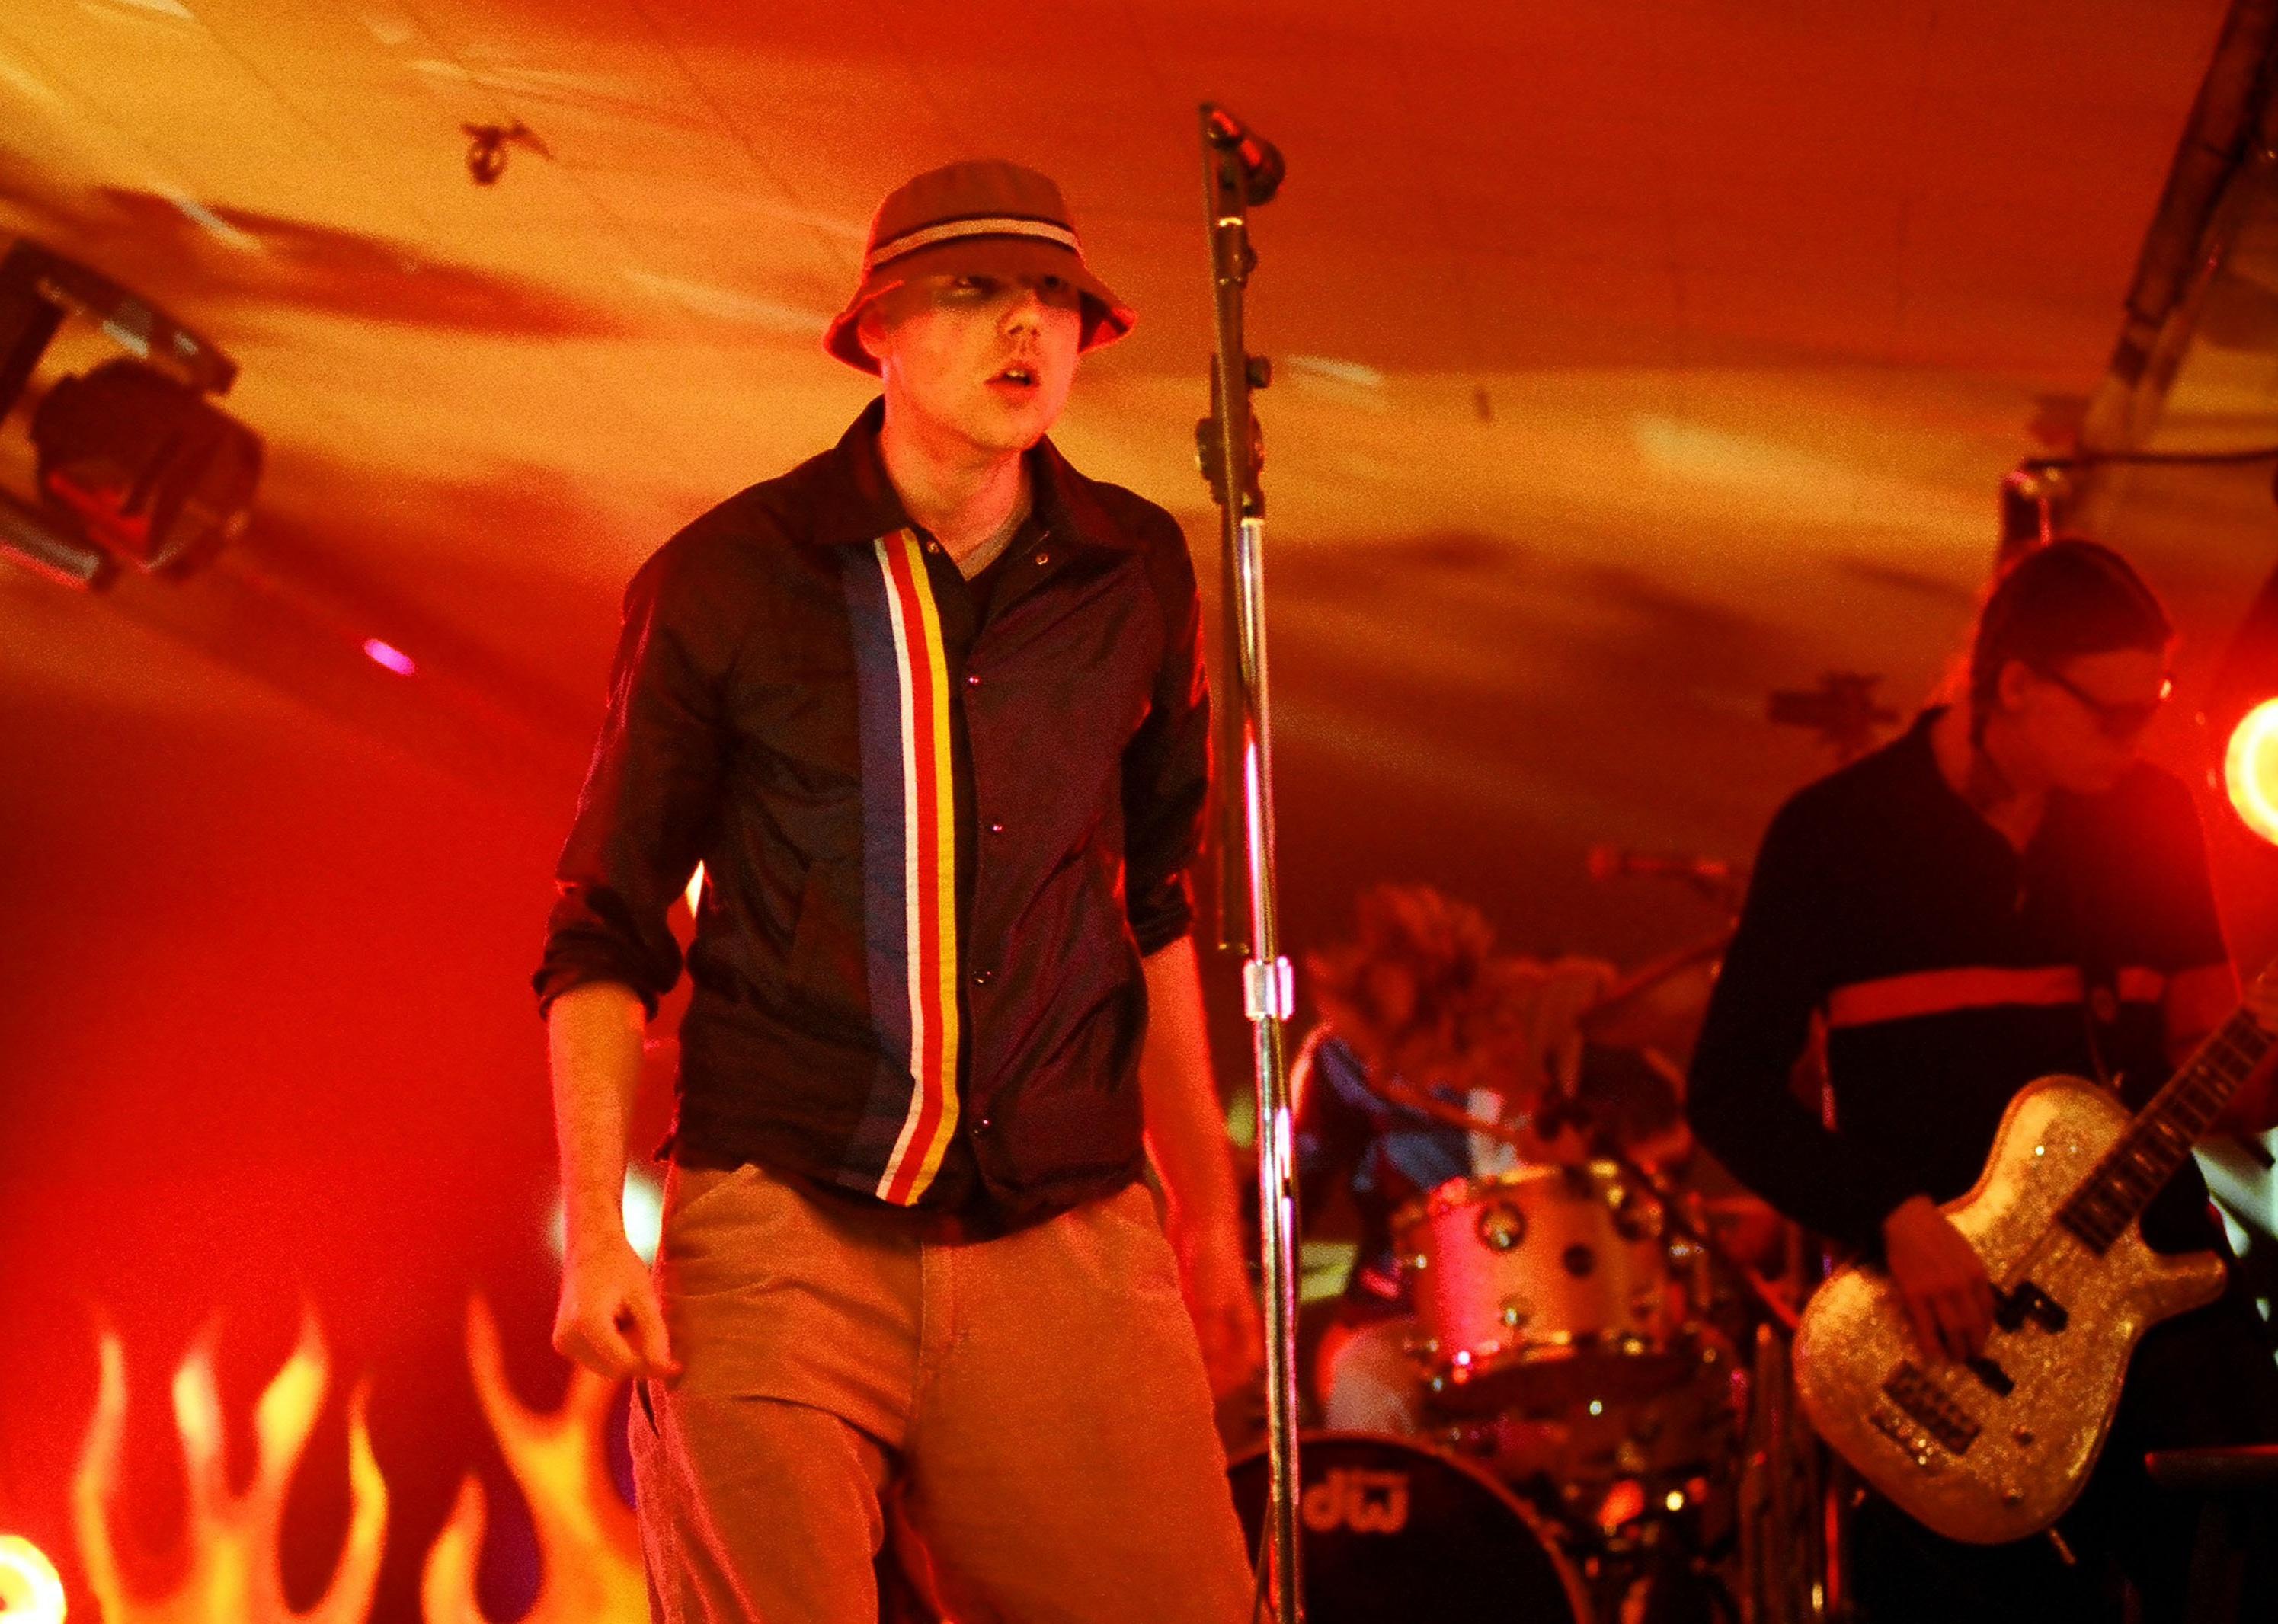 New Radicals performing onstage under a red light.